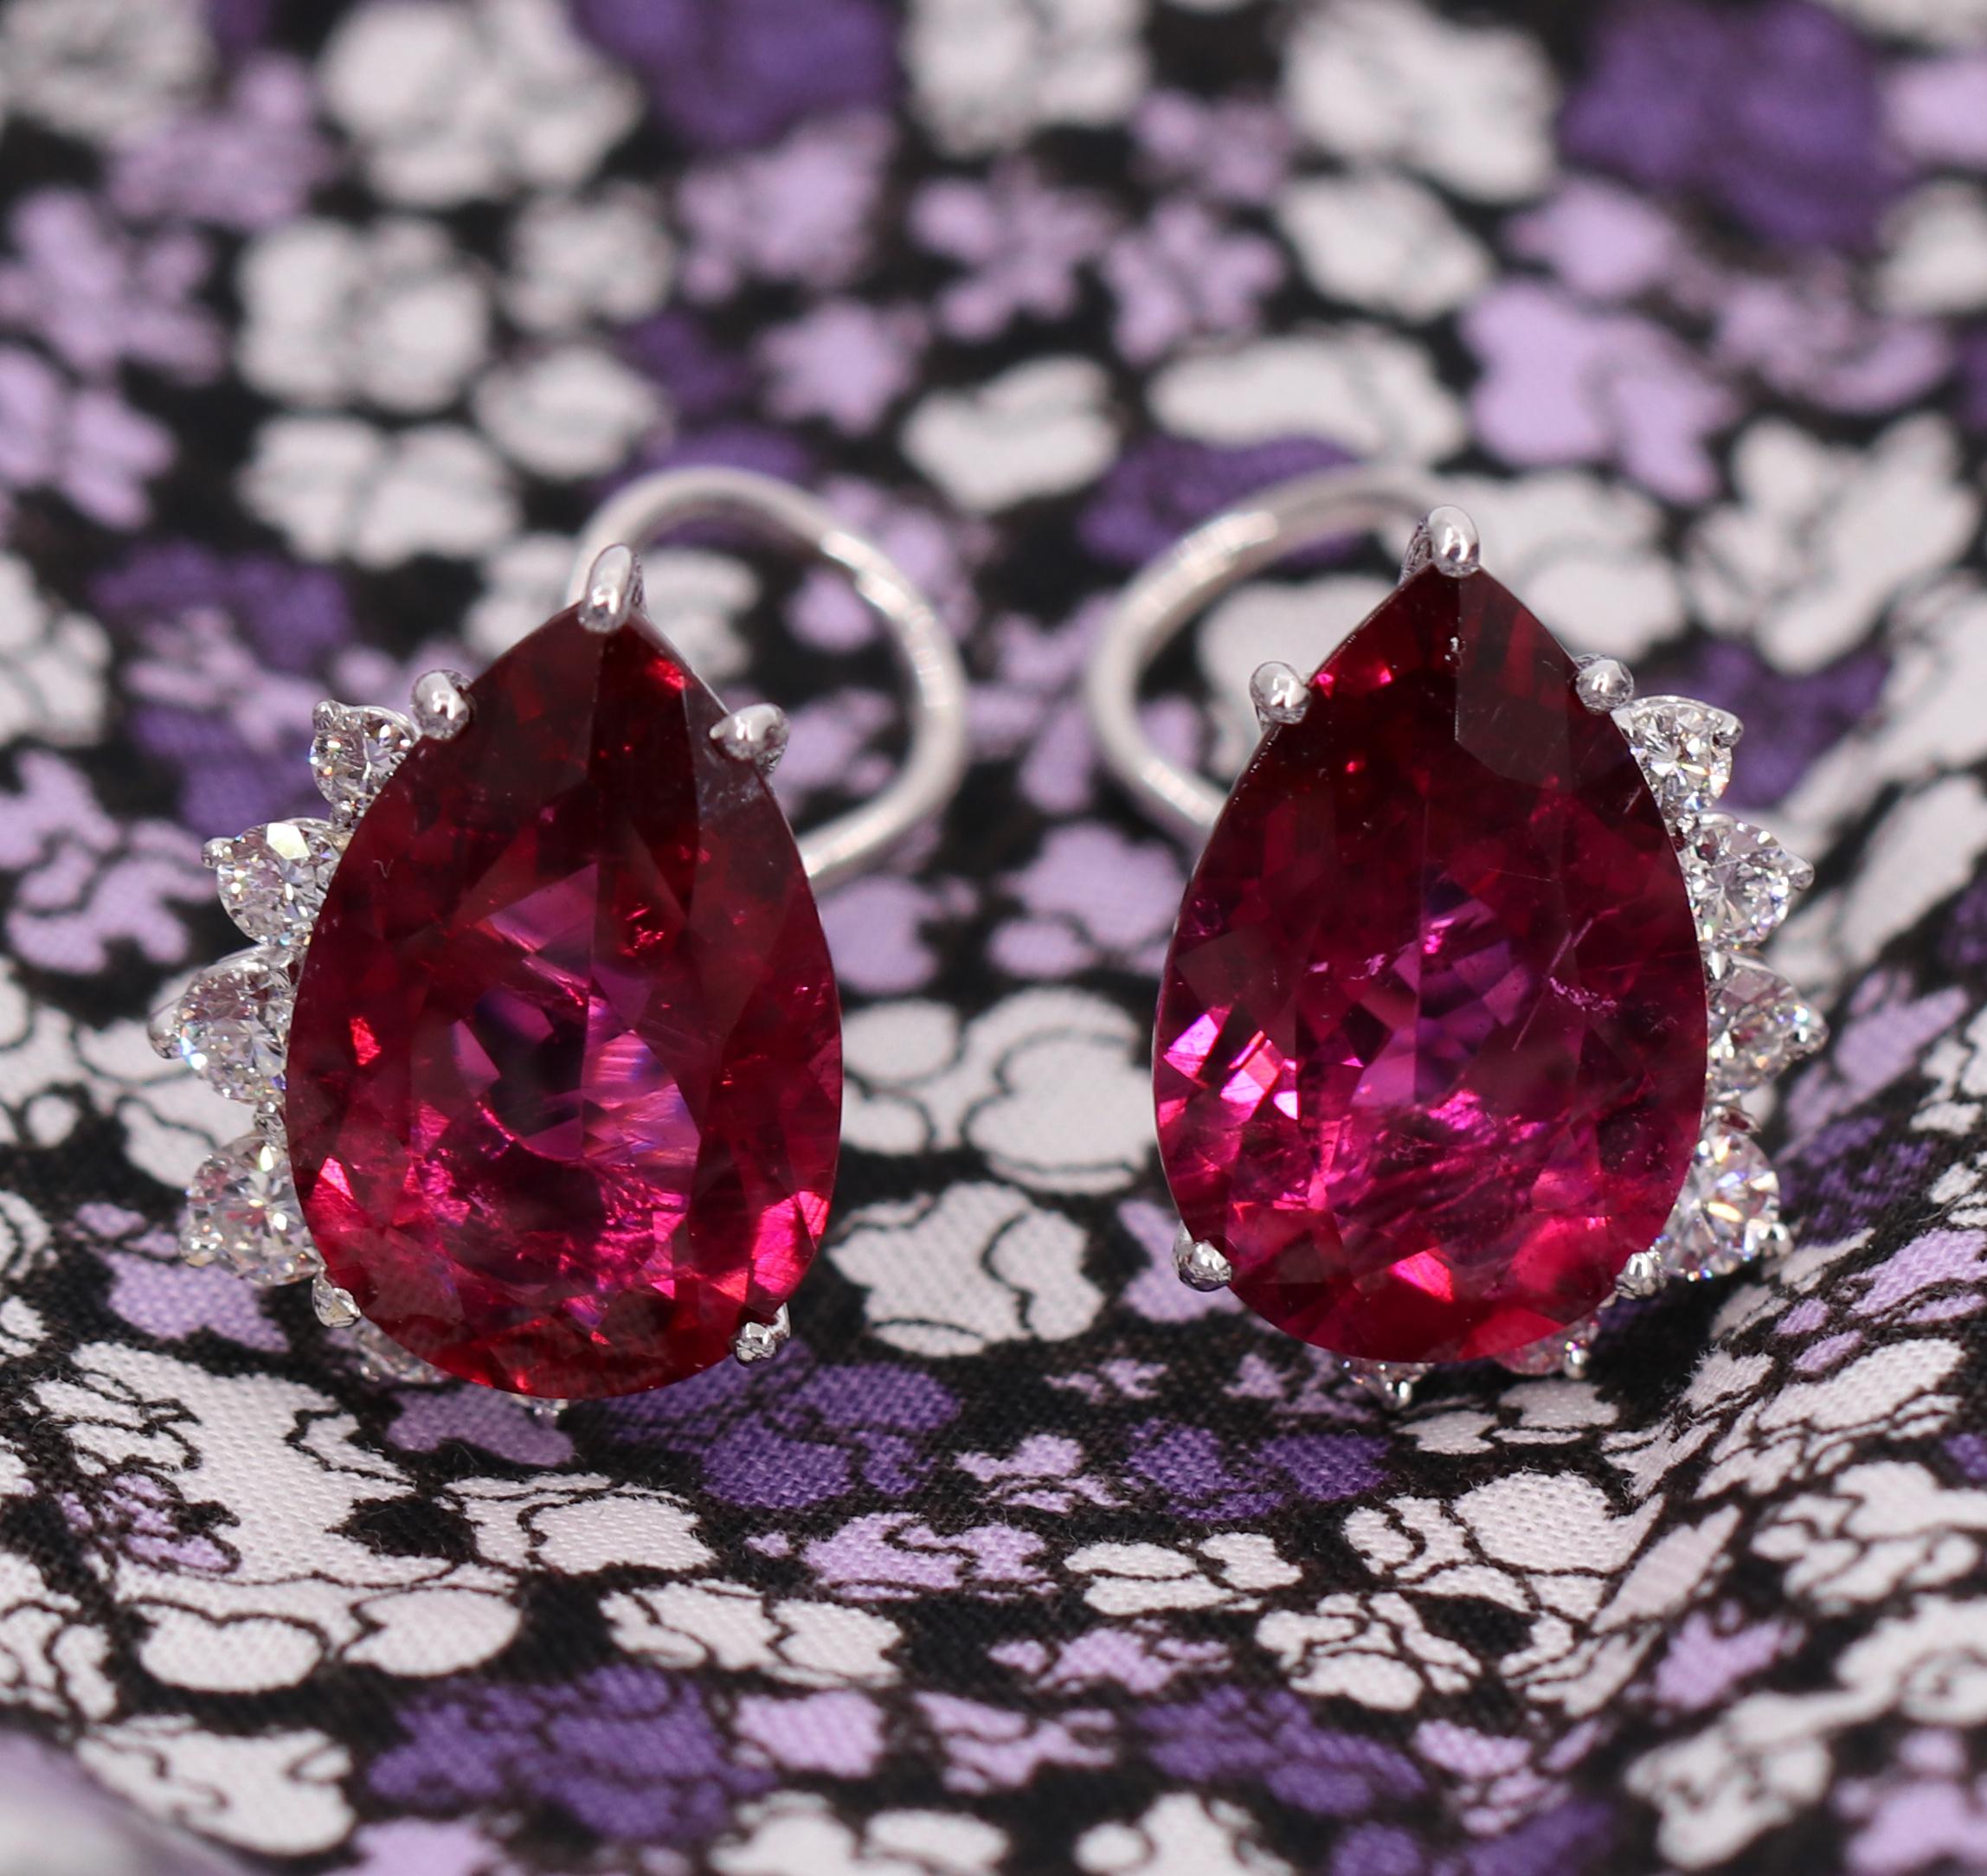 A pair of ladies 18K white gold earrings, each centered around a vivid pear-shaped rubellite tourmaline measuring approximately 24mm X 27mm. The tourmaline are a balanced and saturated red with a slight purple overtone. Swooping around the base of